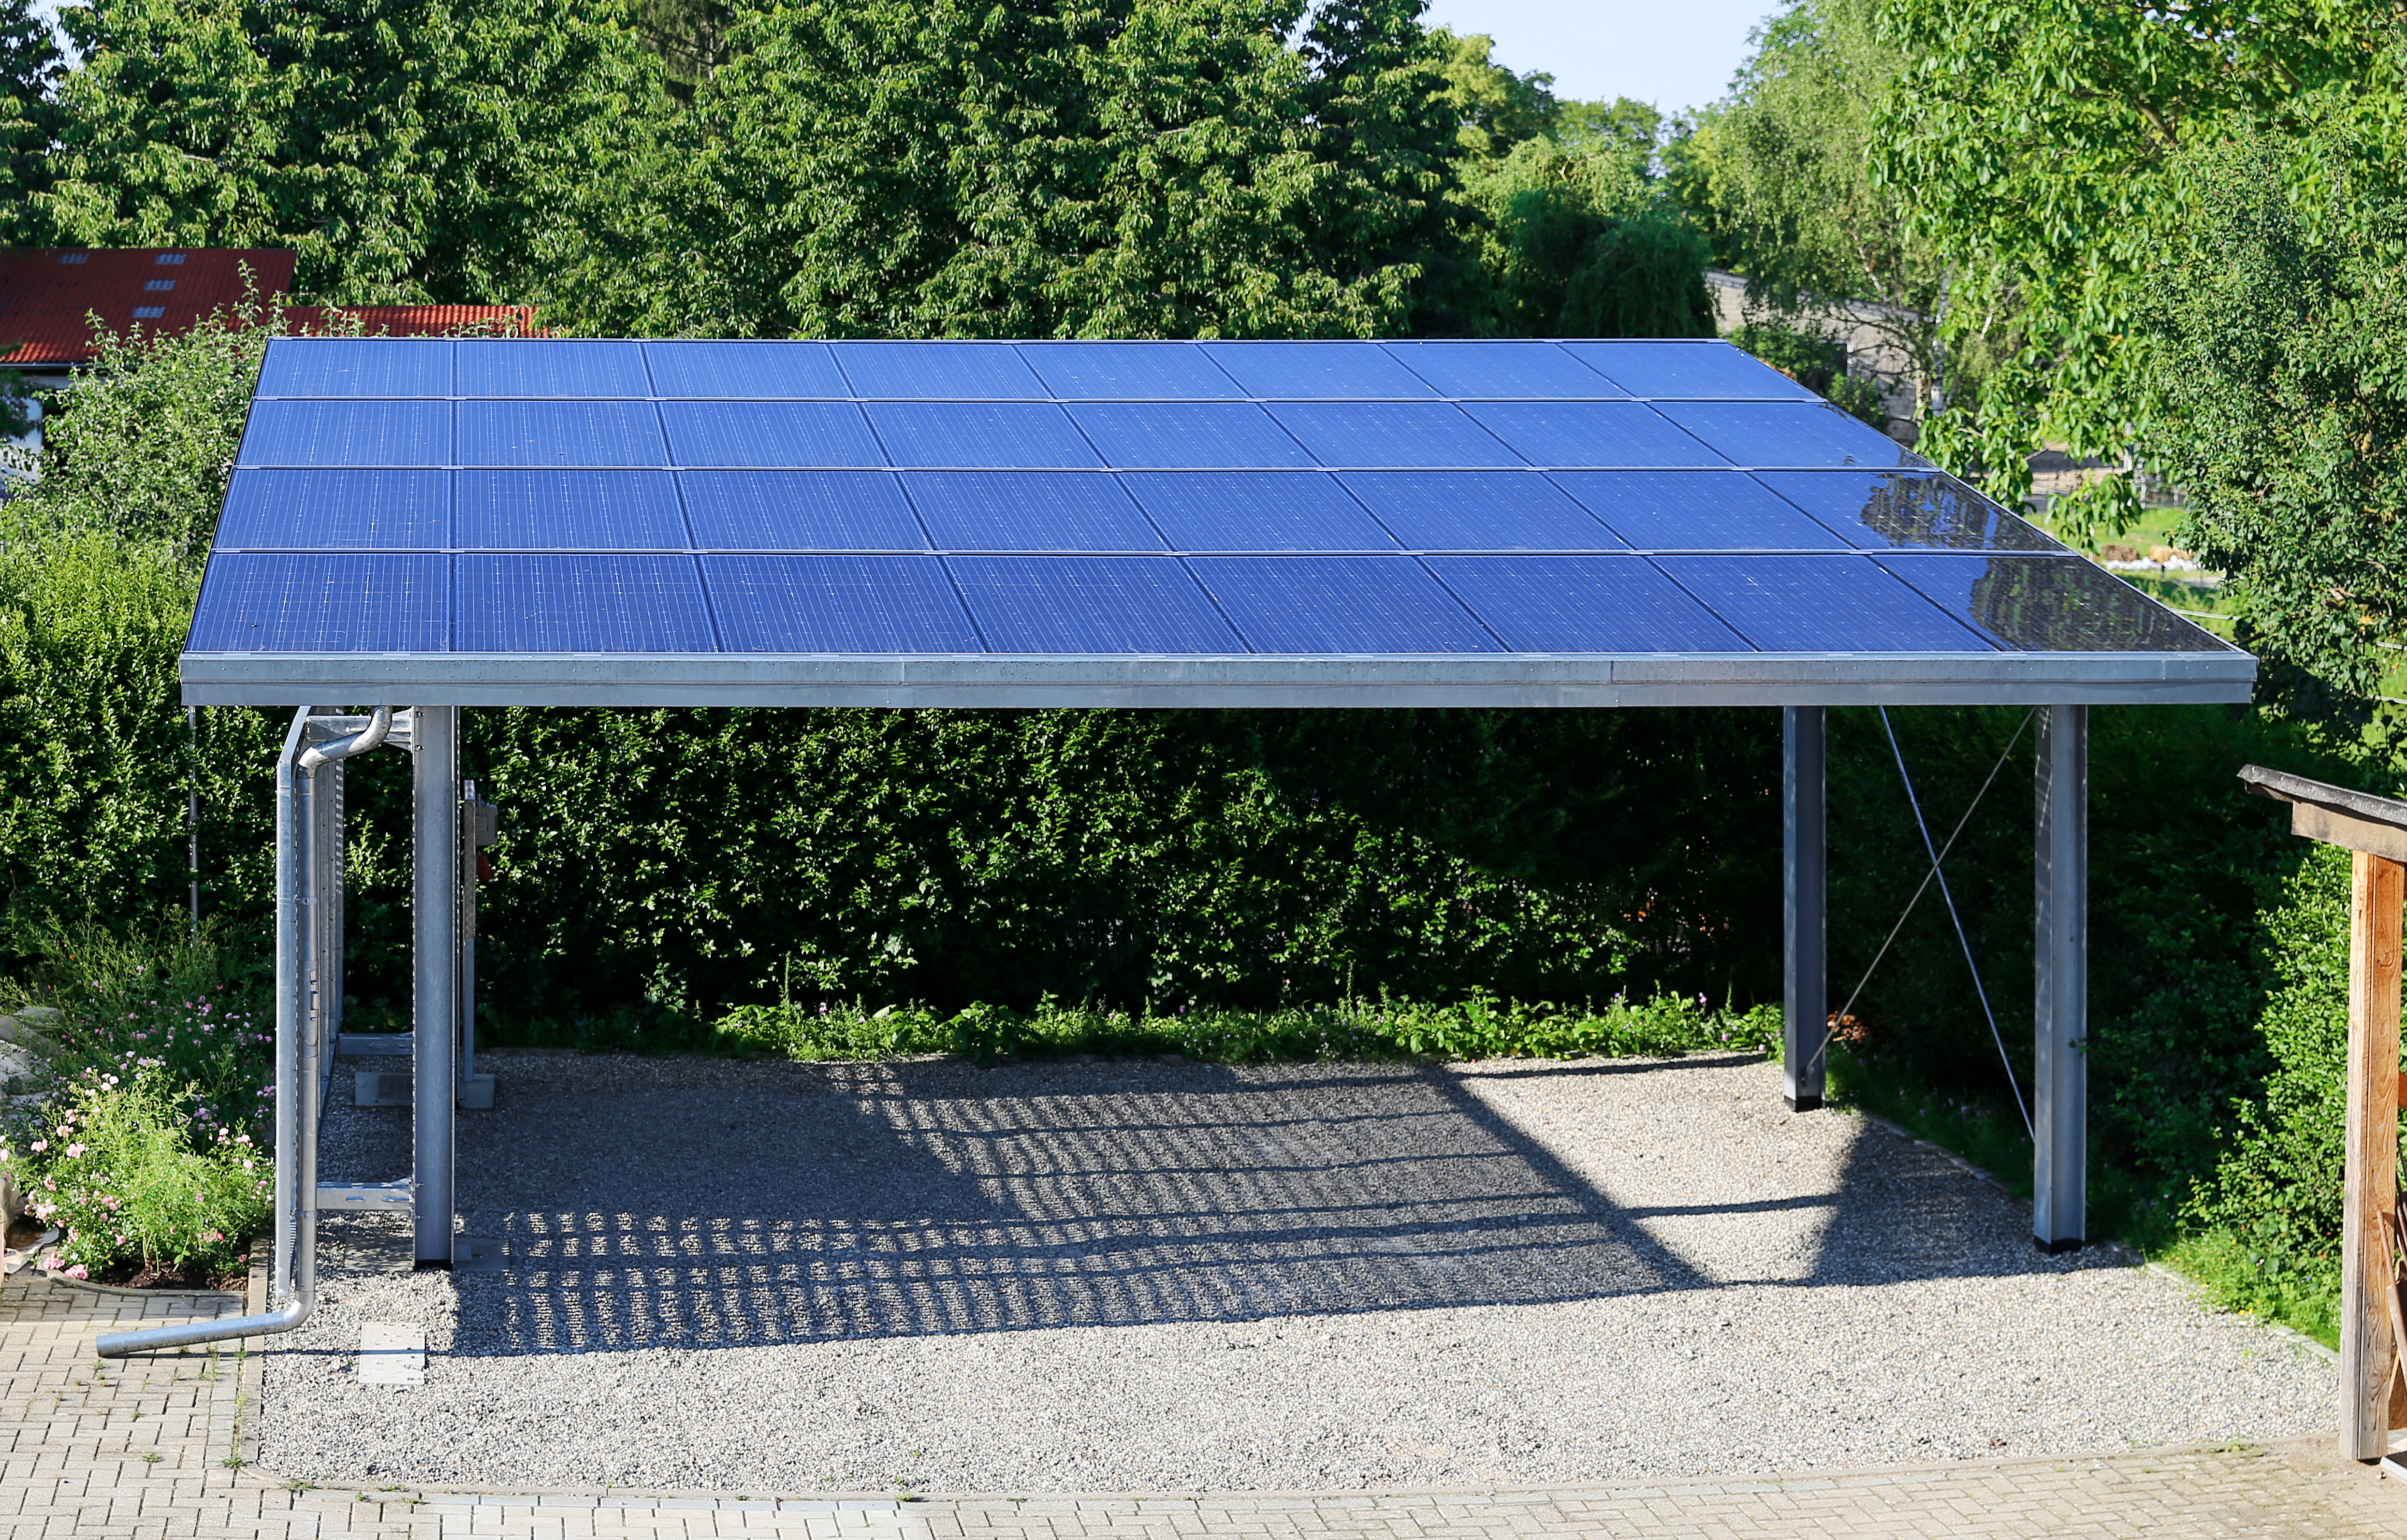 Solar,solar panels,that,also,have,dual,function,of,providing,shade